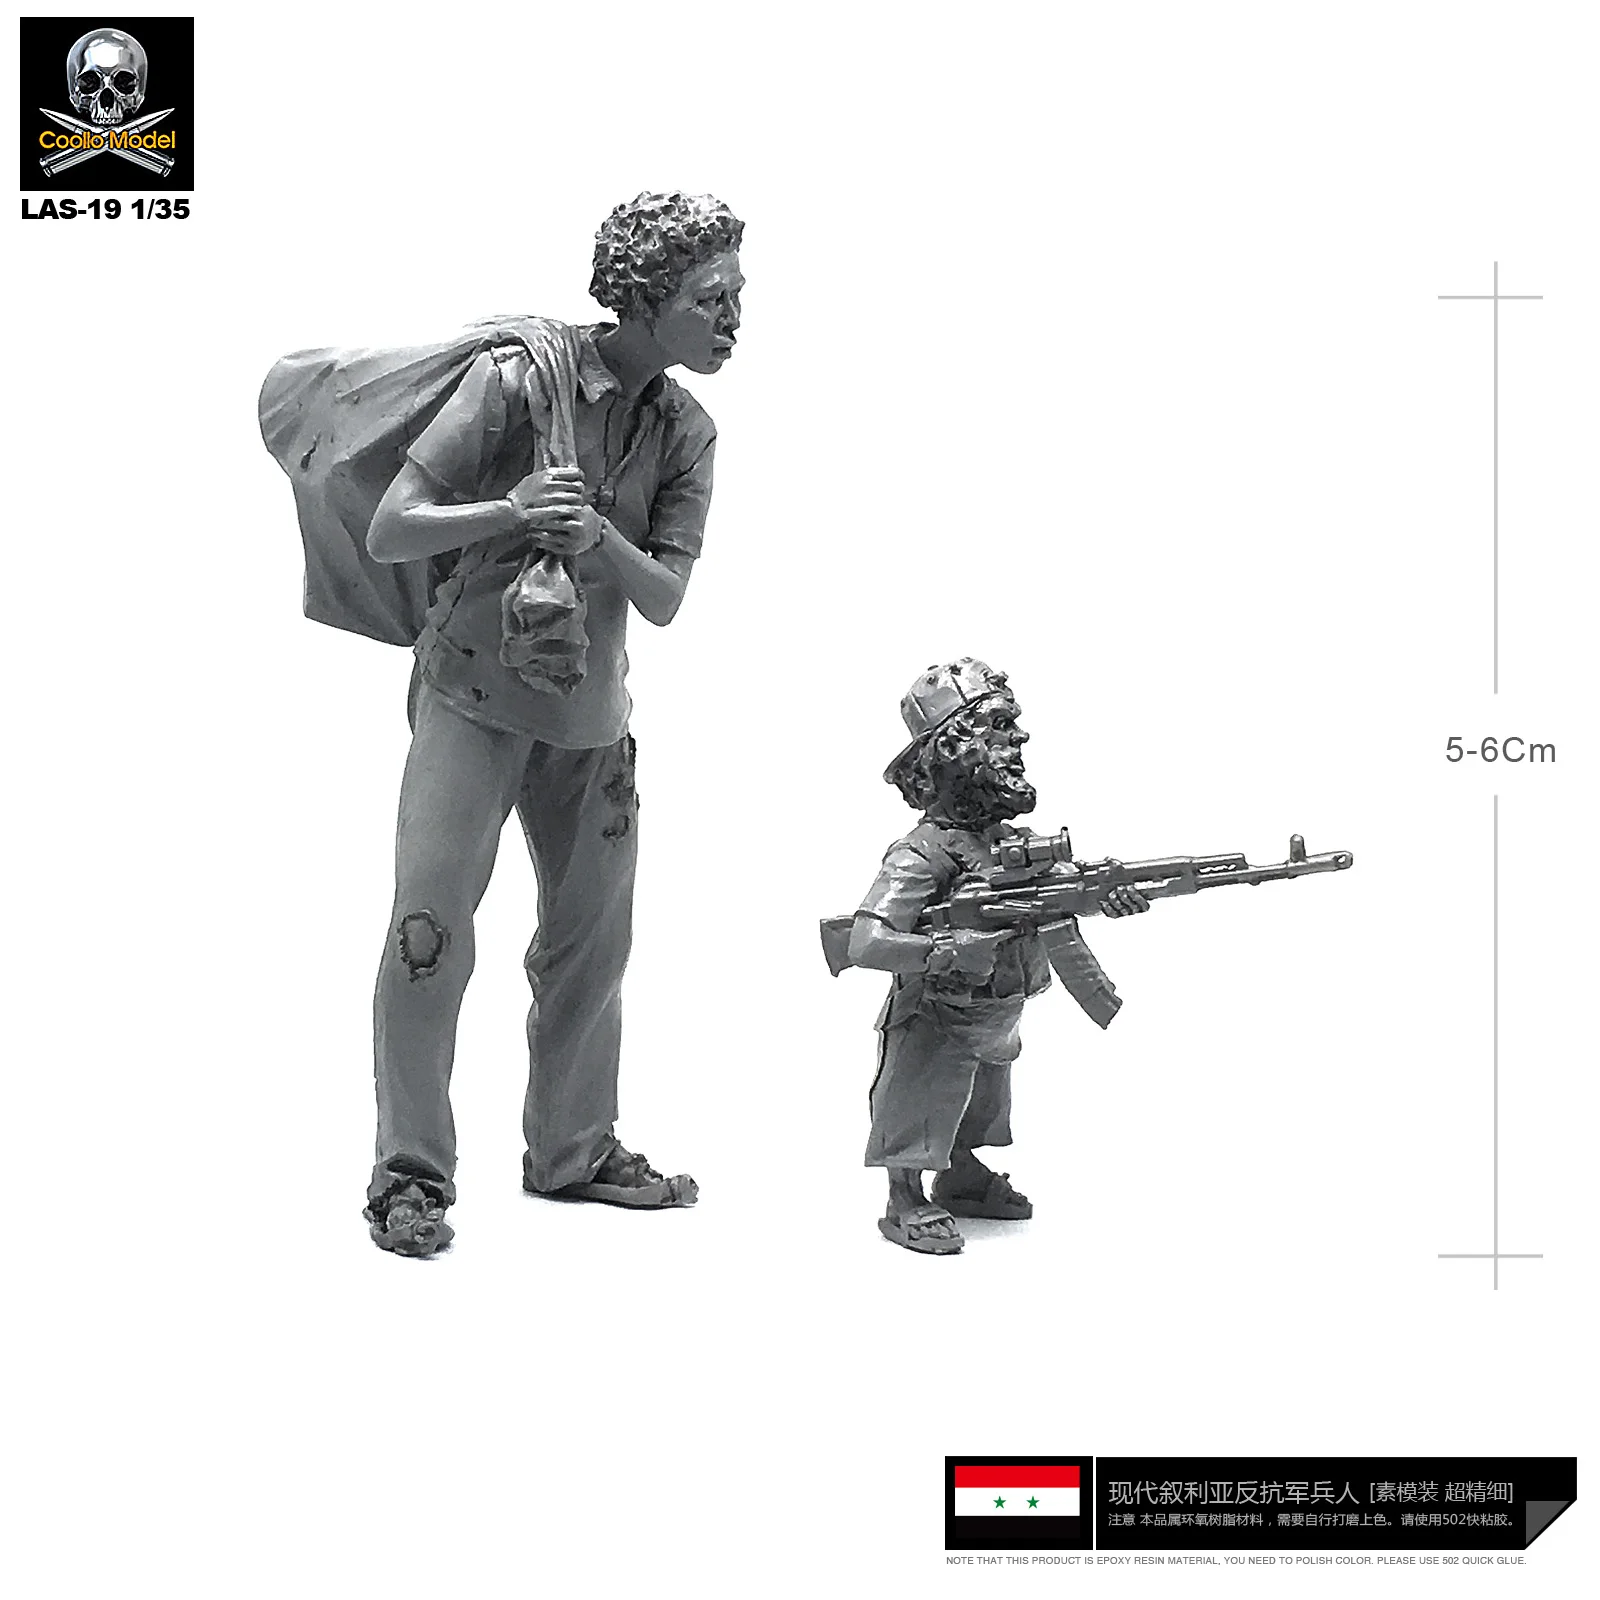 

1/35 Resin Kits Civilian Armed Dwarf Bandits And Refugee Resin Soldiers Model Kits self-assembled Las-19